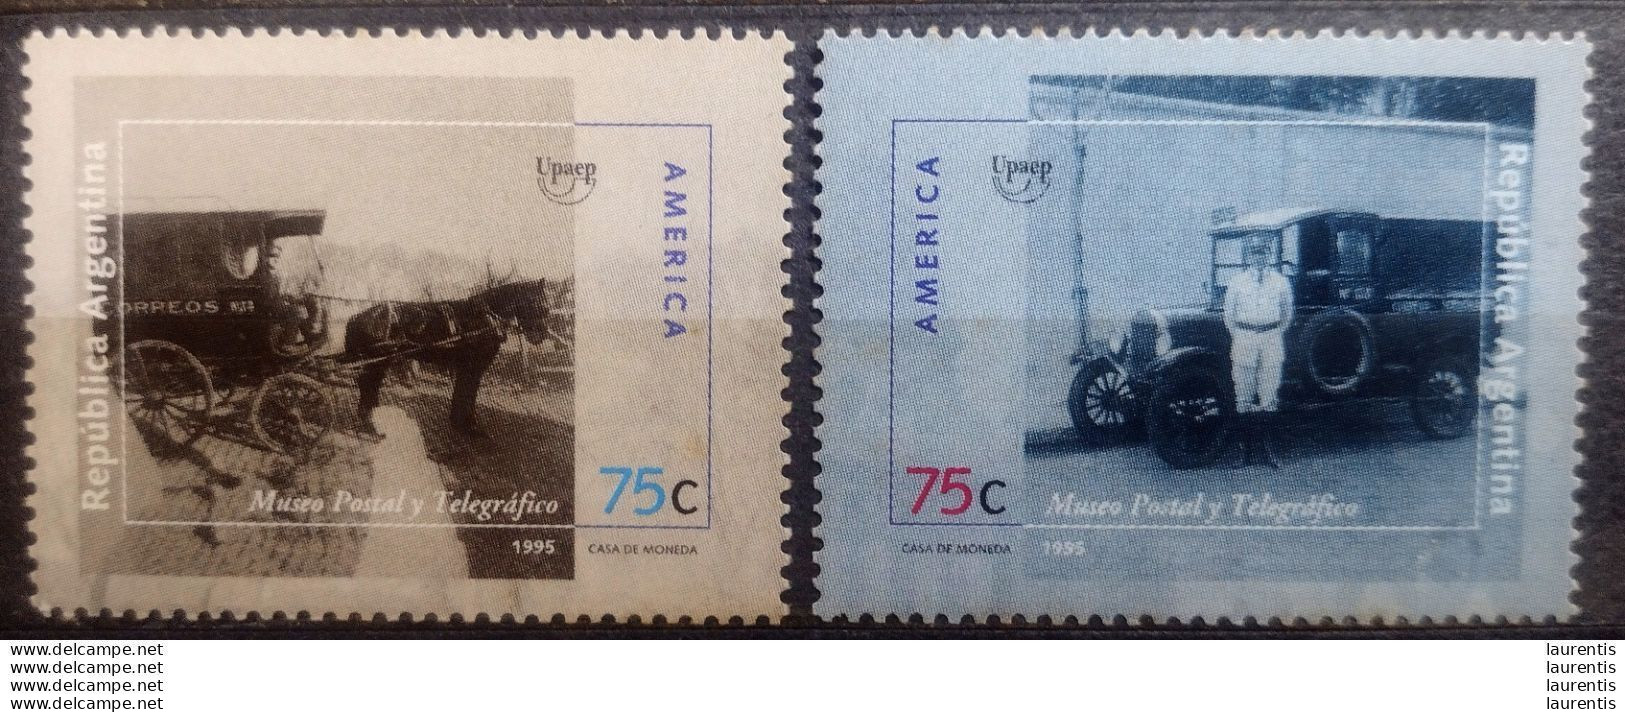 D7467. Trucks - Coaches - Post - Argentina Yv 1891-92 MNH - 1,50 (6) (1) - Camions